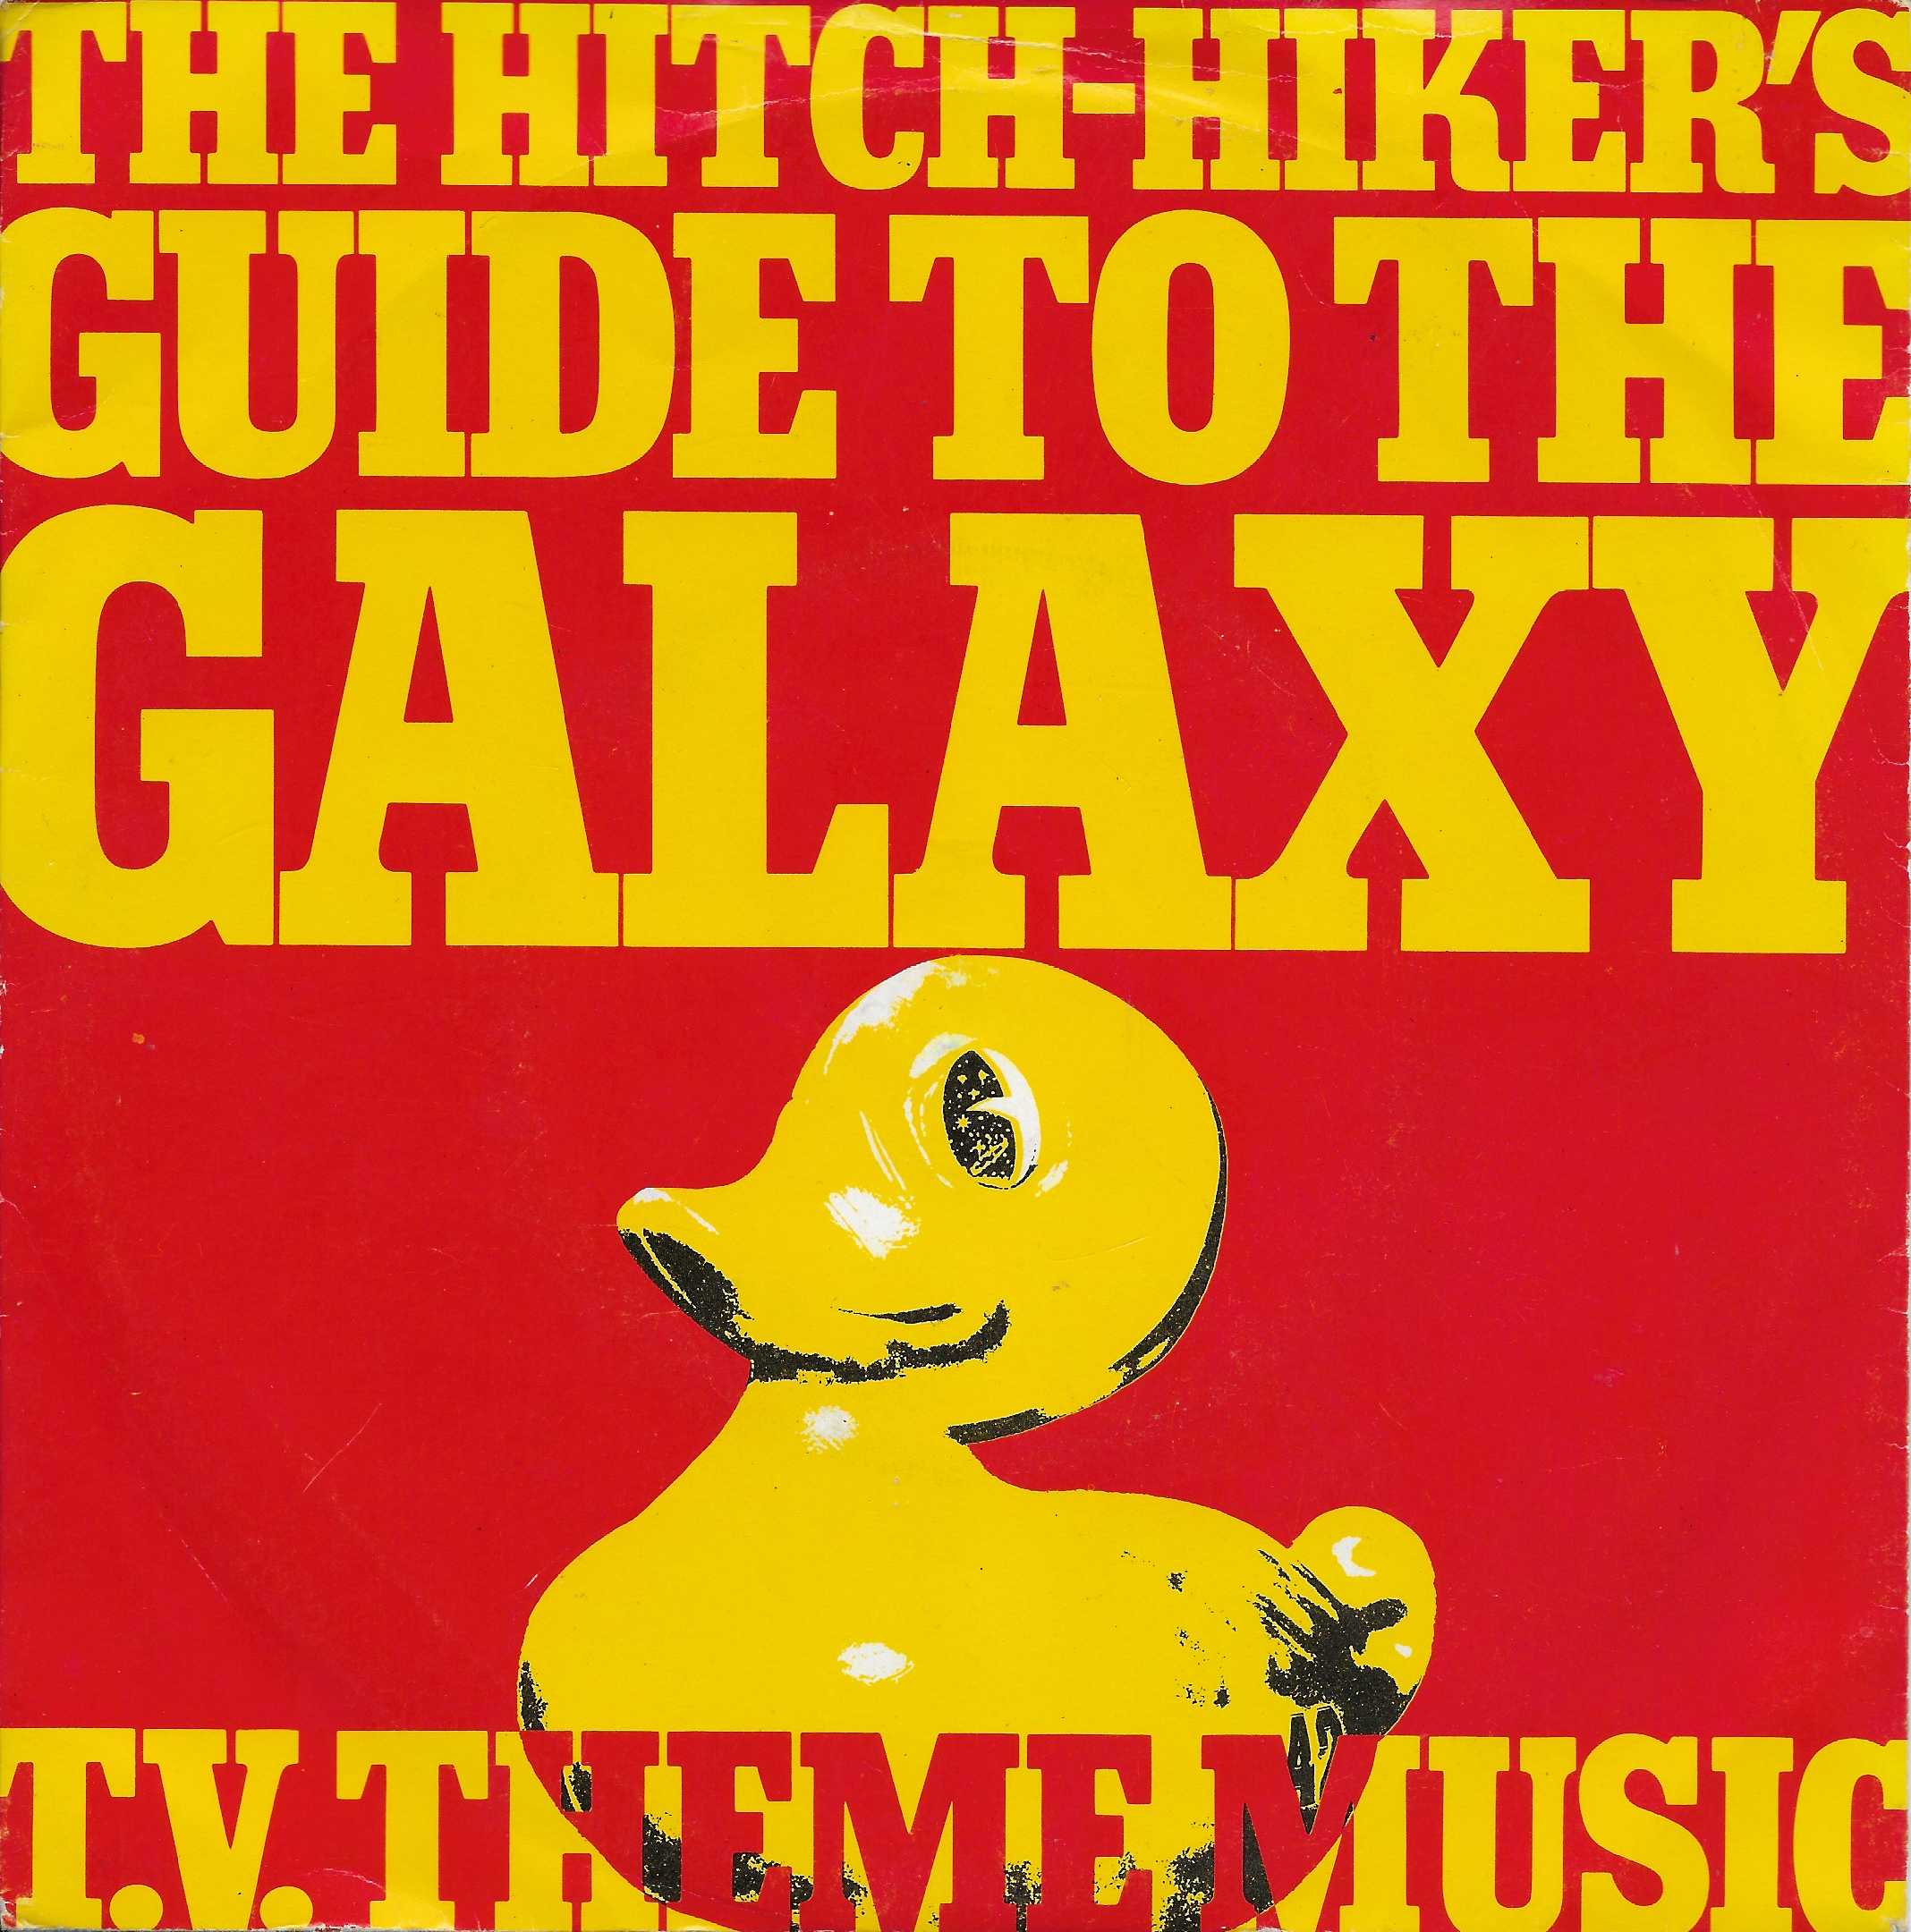 Picture of Journey of the sorcerer (Hitchhiker's guide to the galaxy) by artist B. Leardon / T Souster / Eagles from the BBC singles - Records and Tapes library